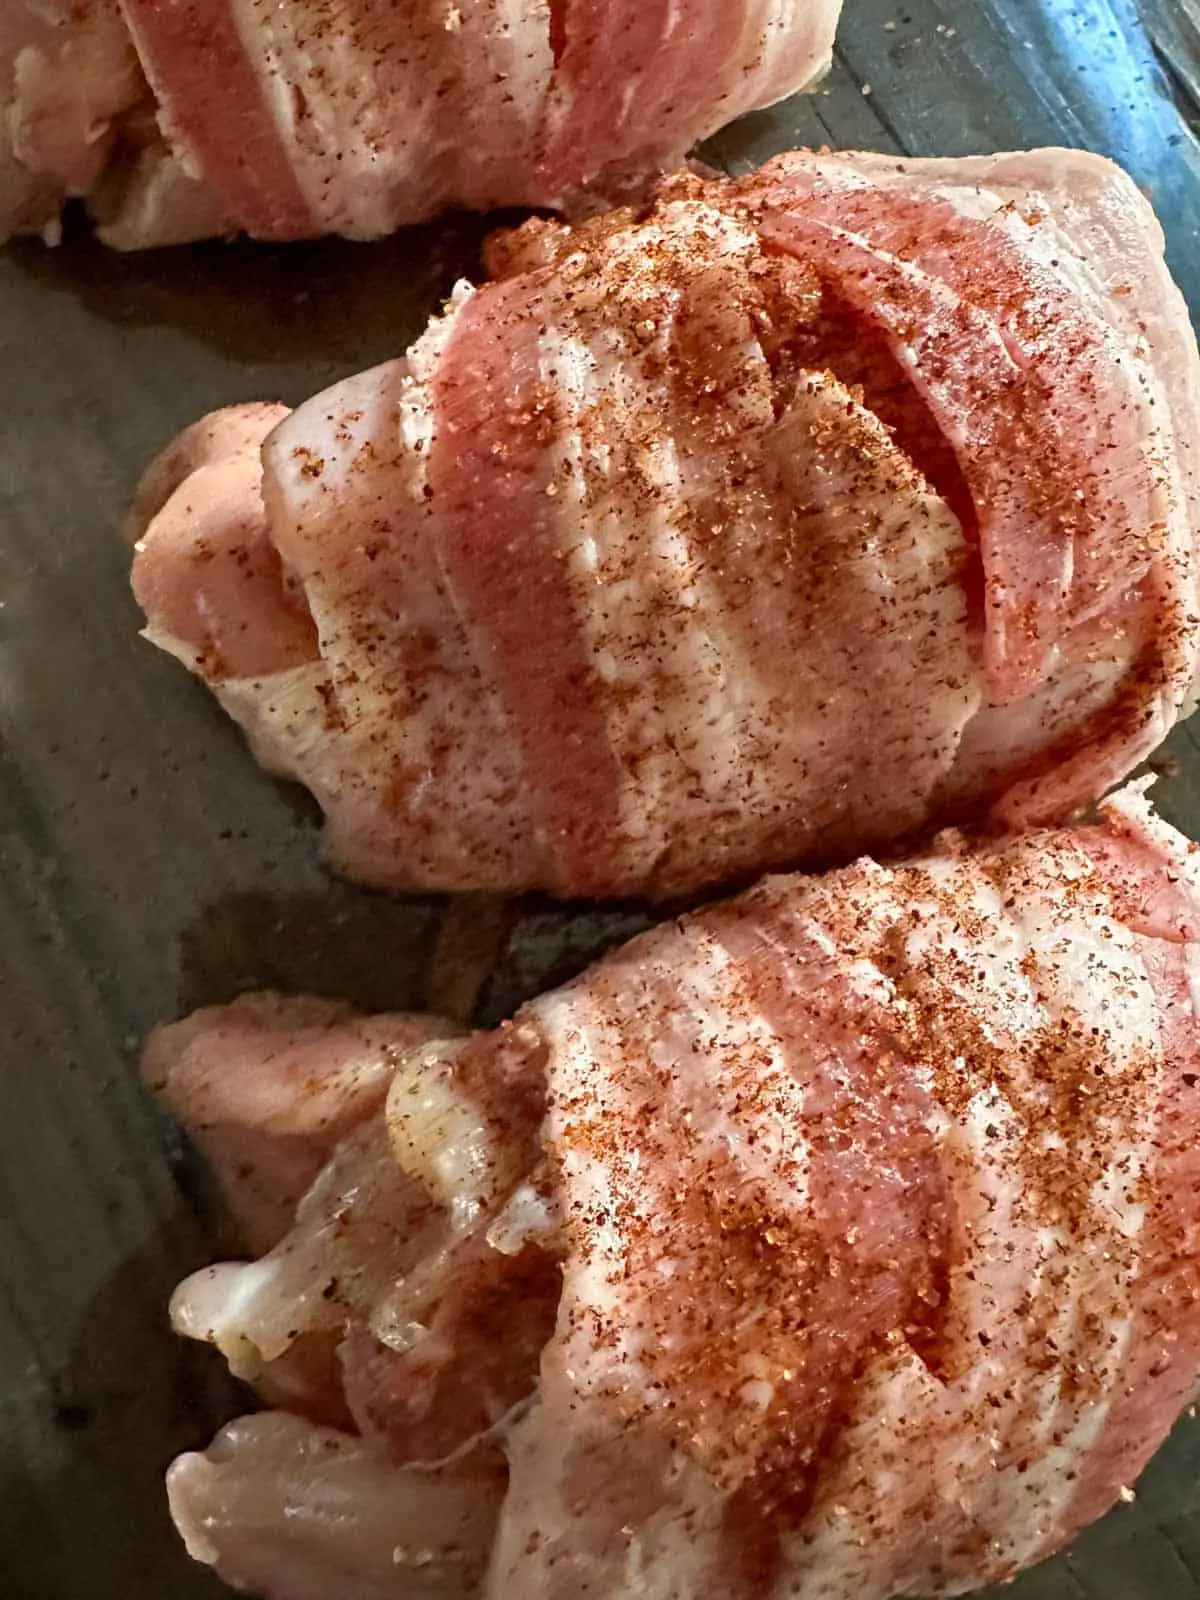 Uncooked chicken armadillo eggs which is chicken stuffed with sausage and wrapped with bacon with dry rub sprinkled on top.